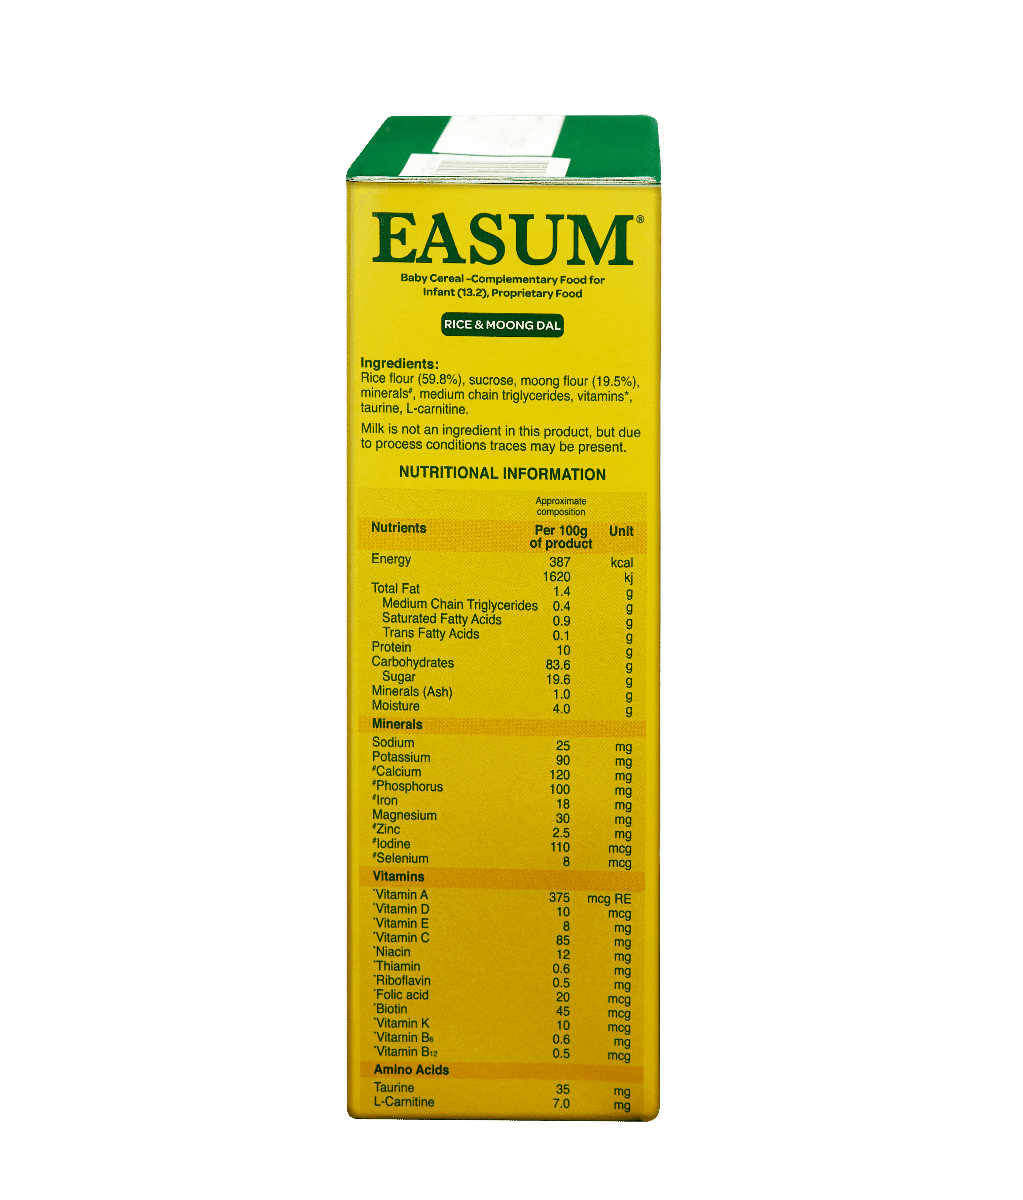 Easum Rice & Moong Dal Baby Cereal, 6 to 24 Months, 400 gm Refill Pack, Pack of 1 